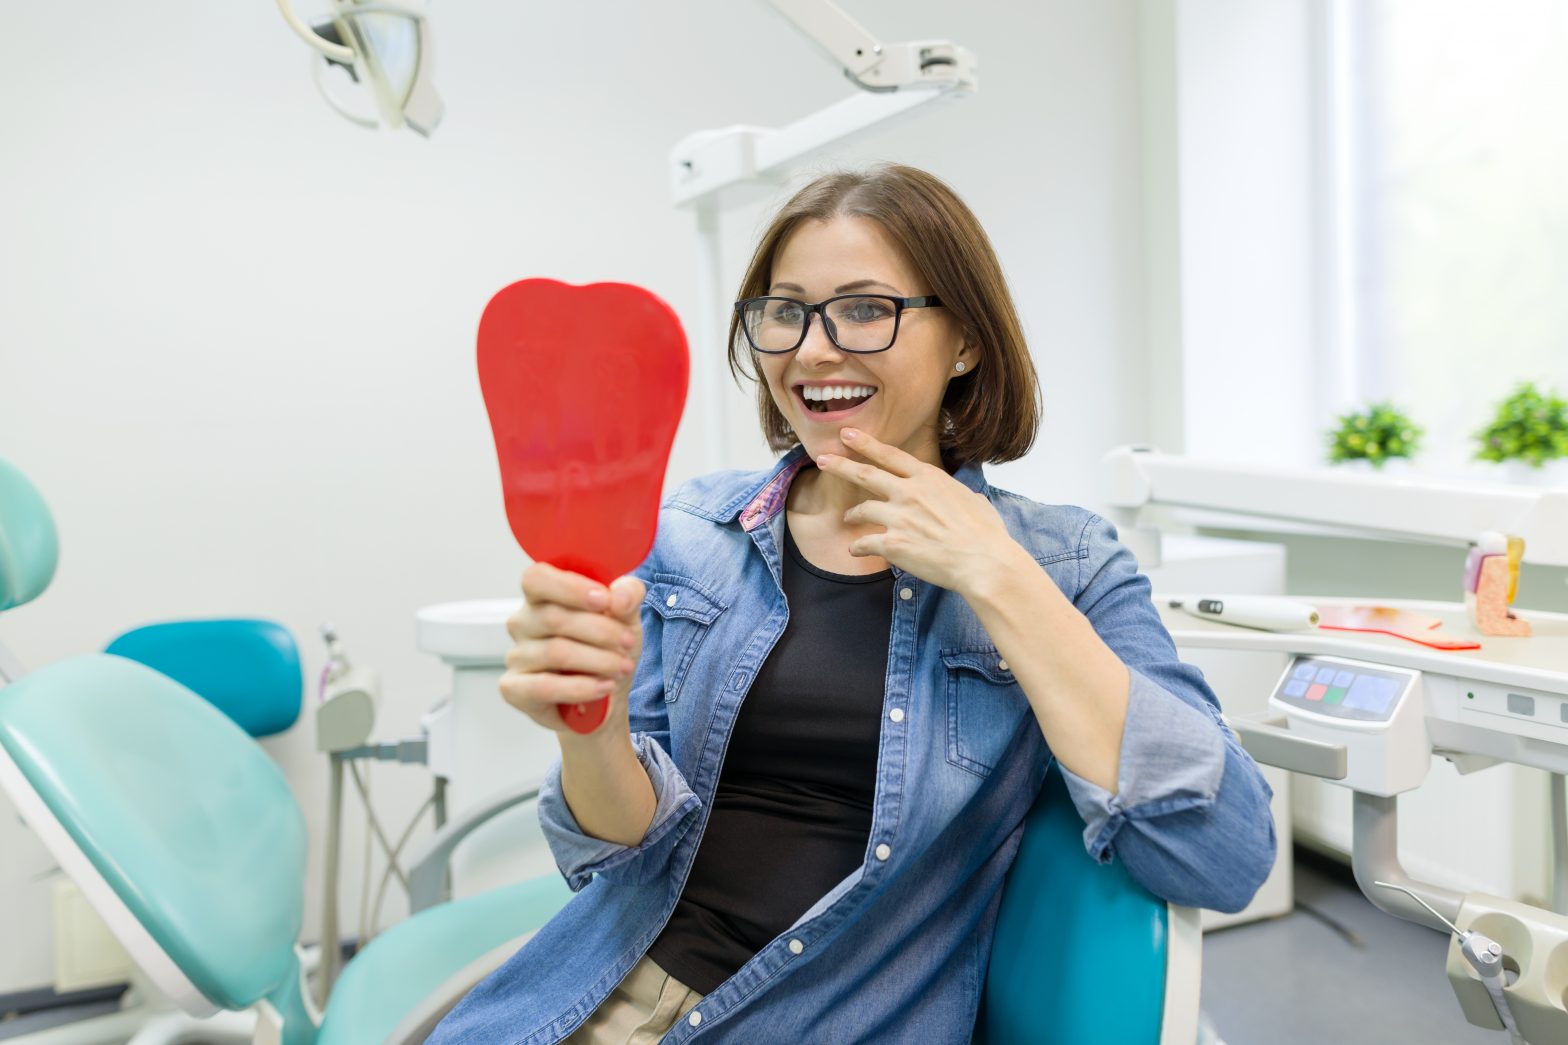 Dental Implants: What You Should Know Before You Make Your New Year ResolutionGregory skeens d.d.s.encinitas family dentistry